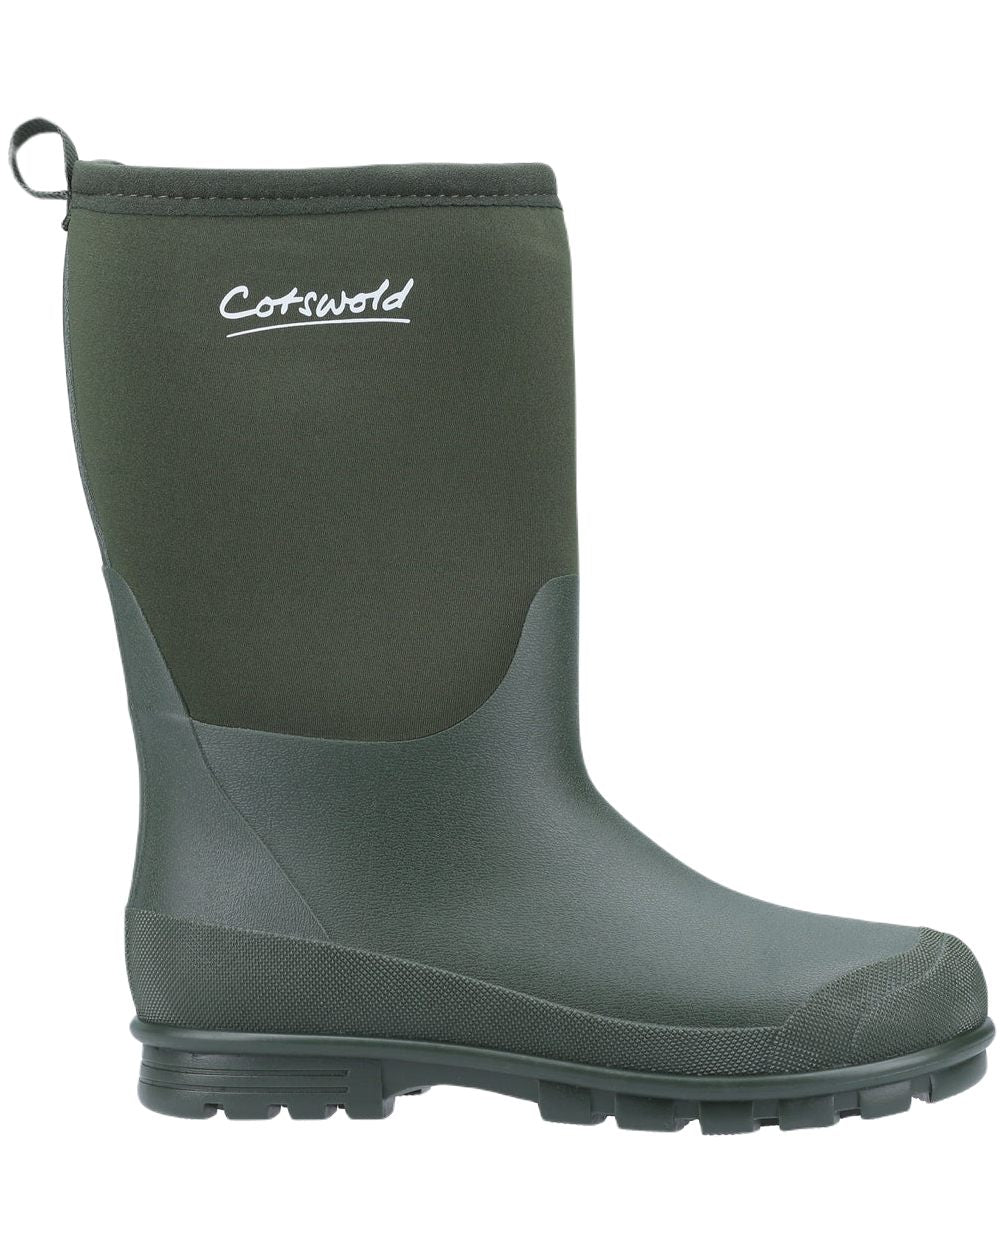 Cotswold Hilly Neoprene Childrens Wellington Boots In Green 